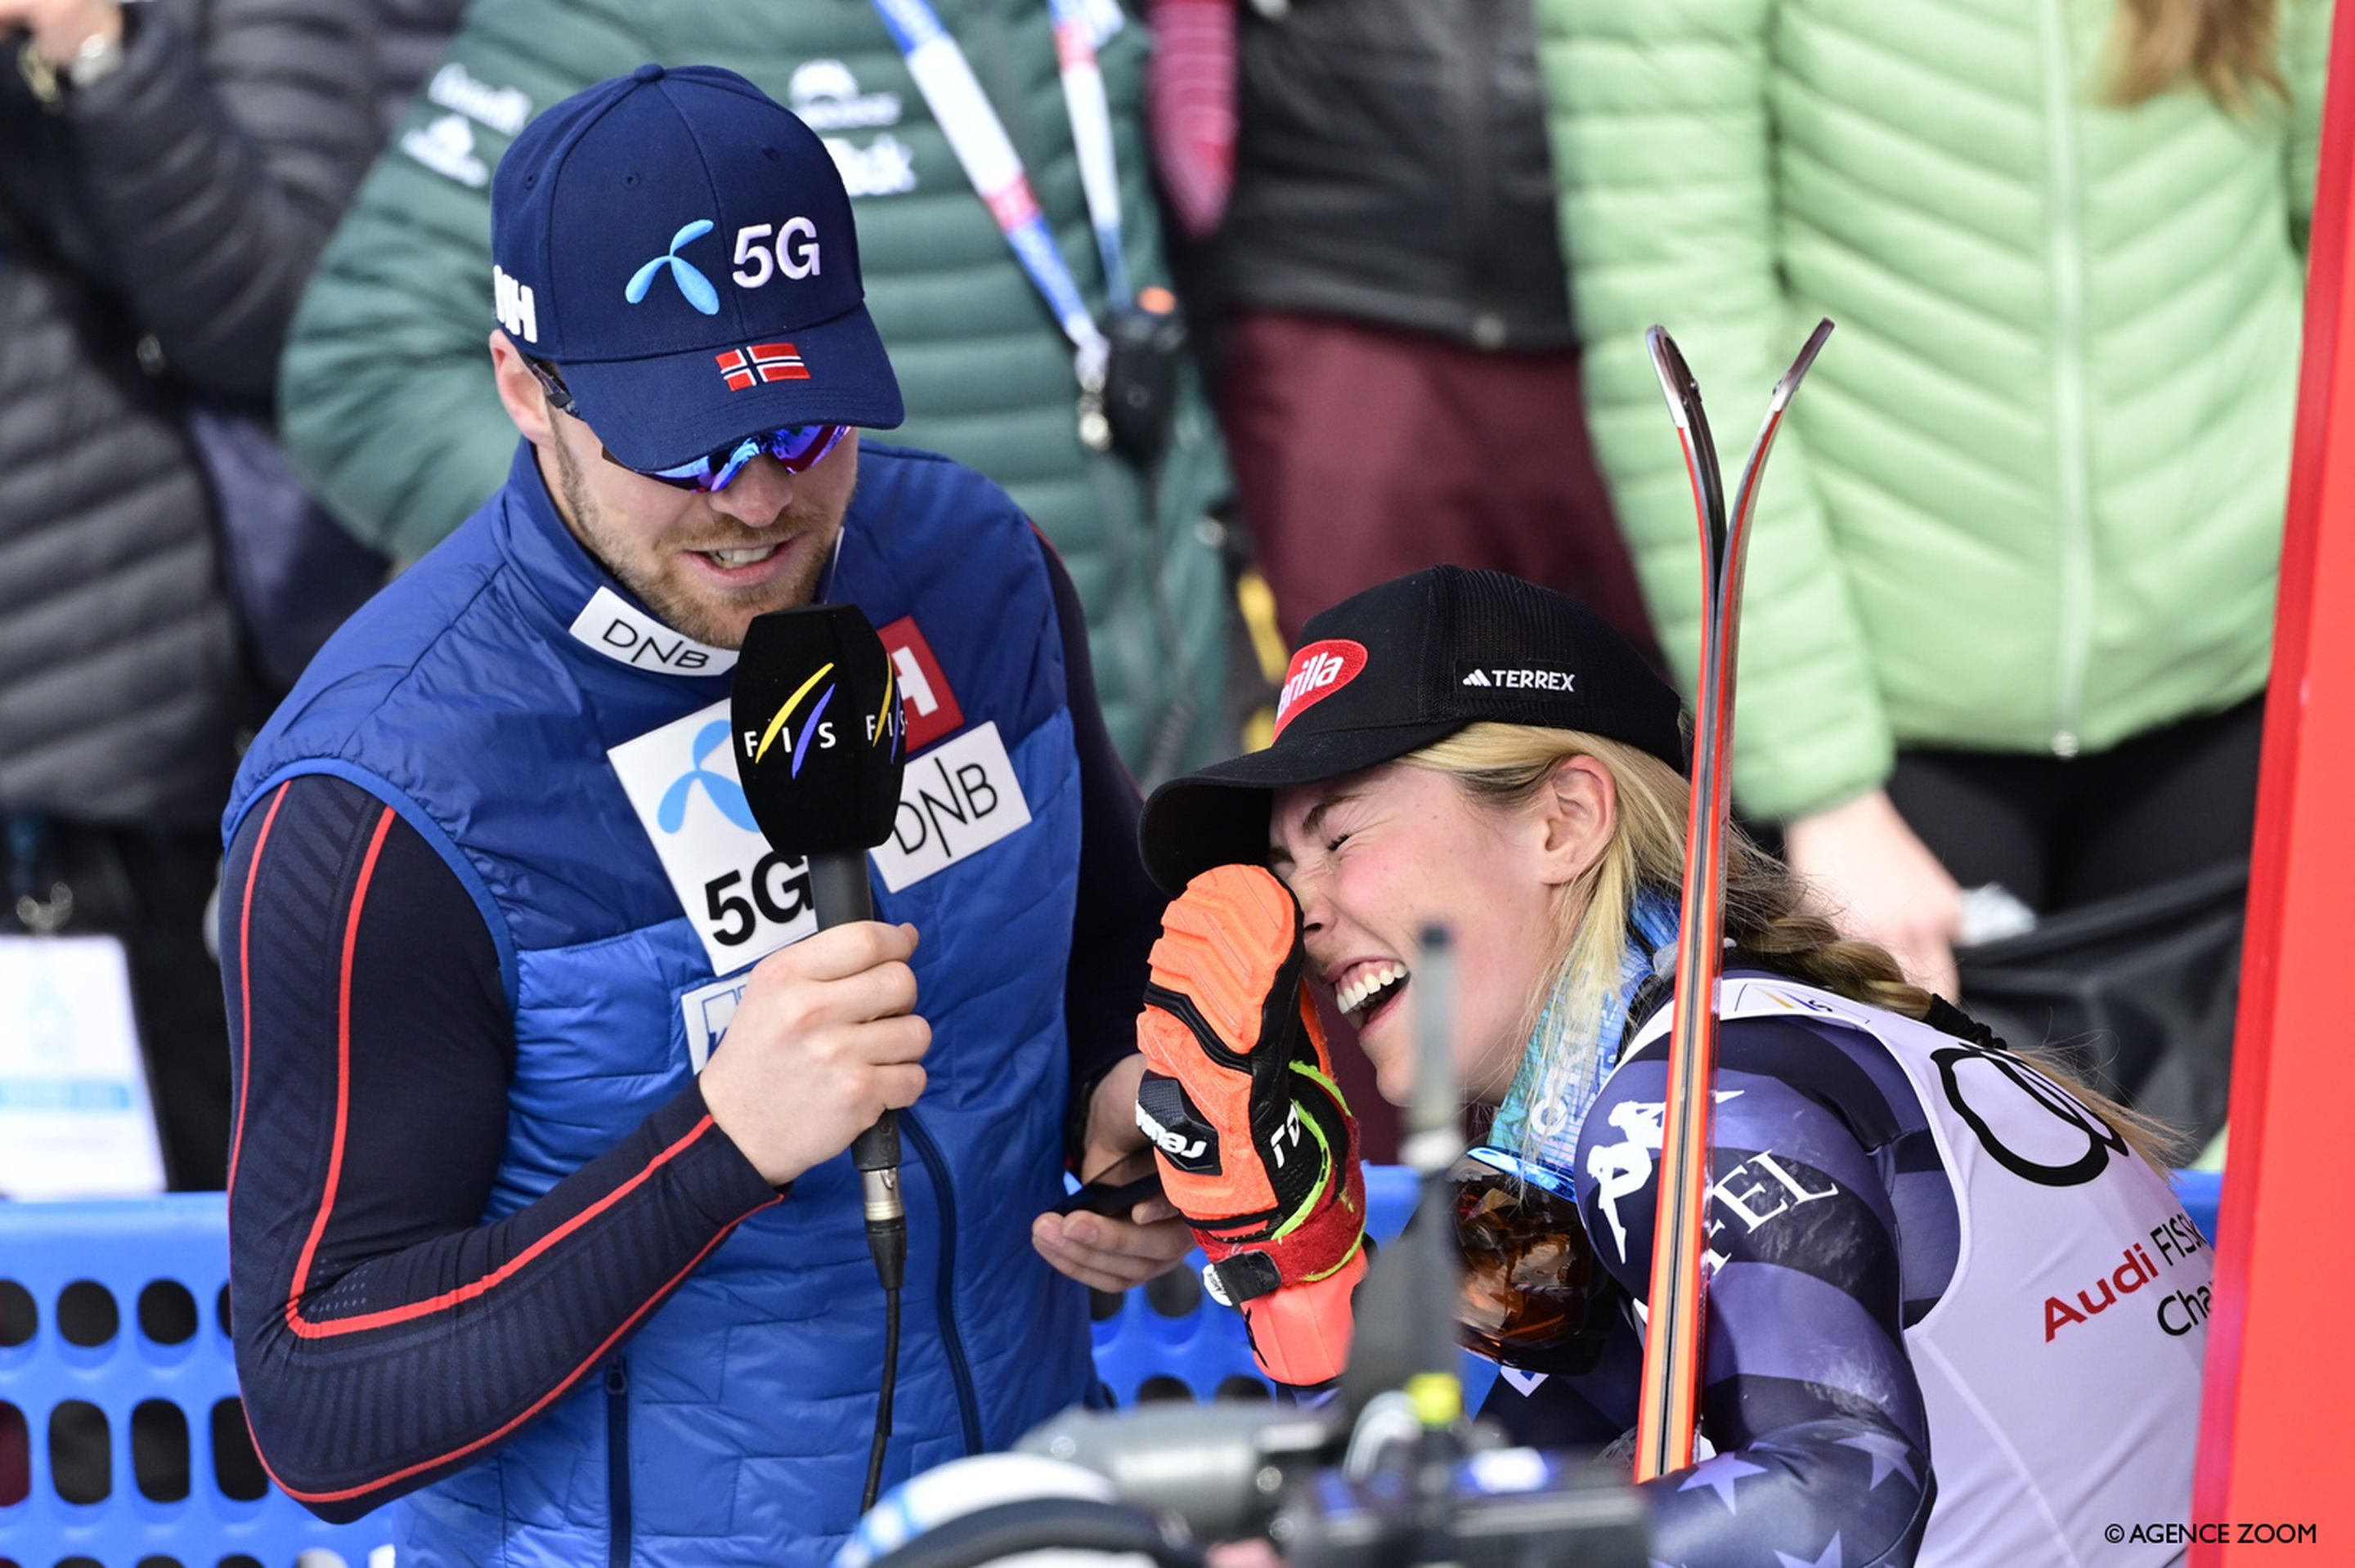 Shiffrin is interviewed by partner and skiing star Aleksander Aamodt Kilde after her record-setting win (Agence Zoom).